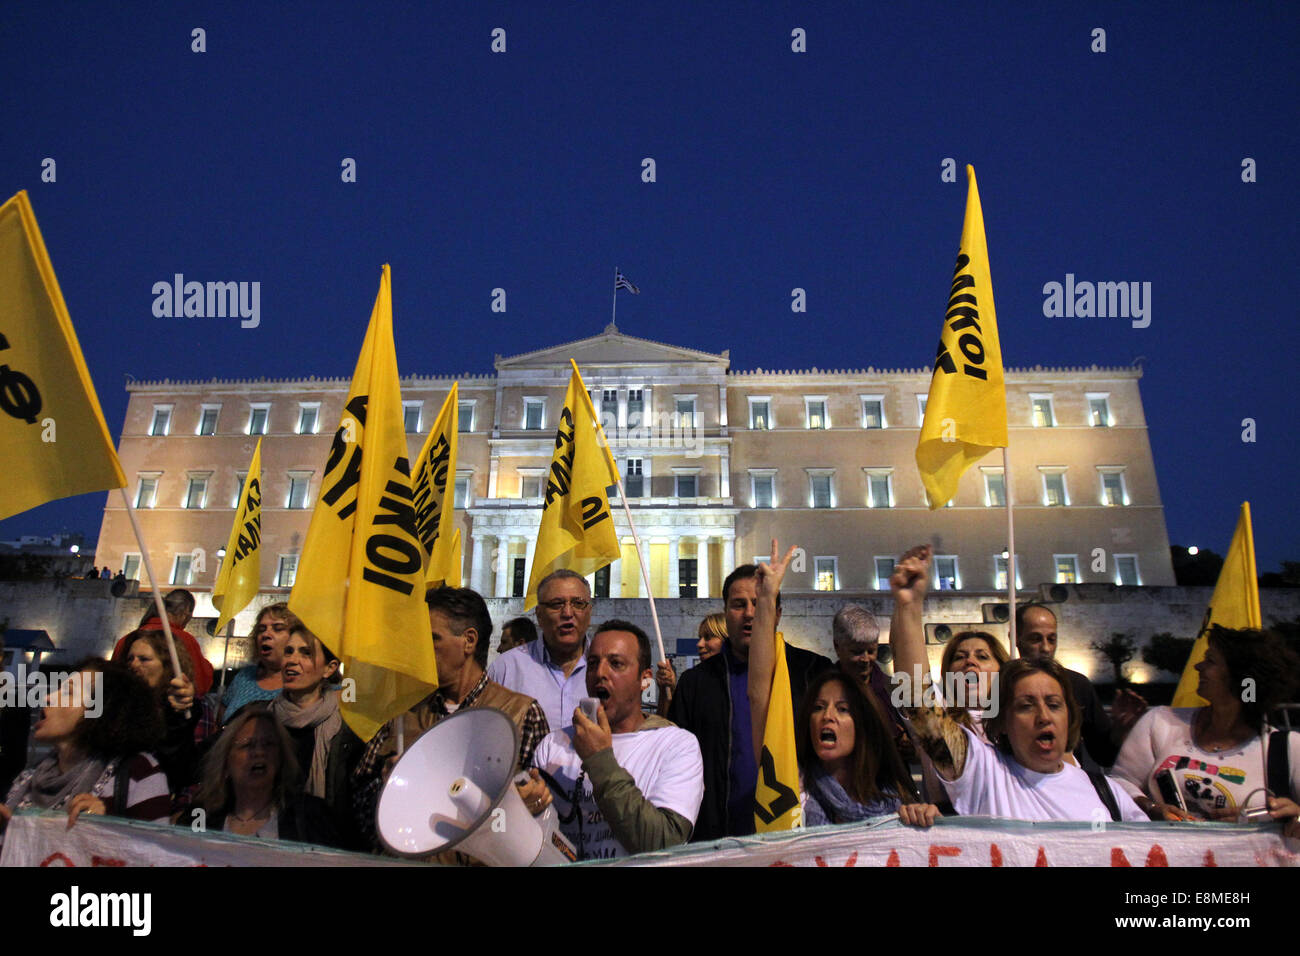 Athens, Greece. 10th Oct, 2014. Protestors shout slogans outside the Greek Parliament building during a rally in Athens, Greece, Oct. 10, 2014. Greek Parliament will vote Friday on a confidence motion proposed by Greek Government. According to local political analysts, the government is expected to easily win the roll-call vote sought by Greek Prime Minister Antonis Samaras in an effort to halt early general elections. Credit:  Marios Lolos/Xinhua/Alamy Live News Stock Photo